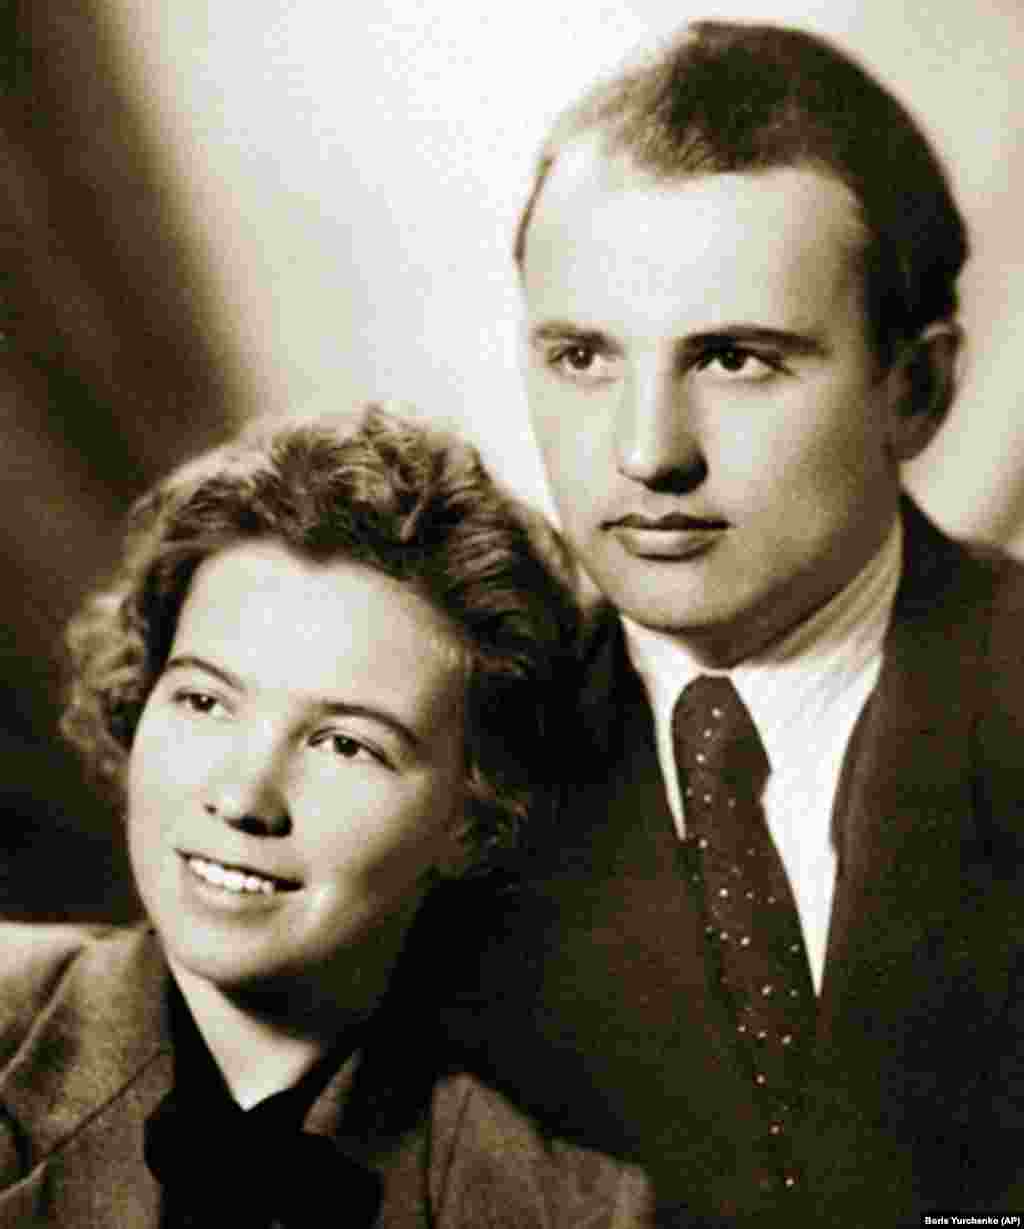 A portrait of Raisa Gorbacheva and Mikhail Gorbachev, who were married in September 1953. They were married for 46 years before Raisa died of leukemia in 1999.